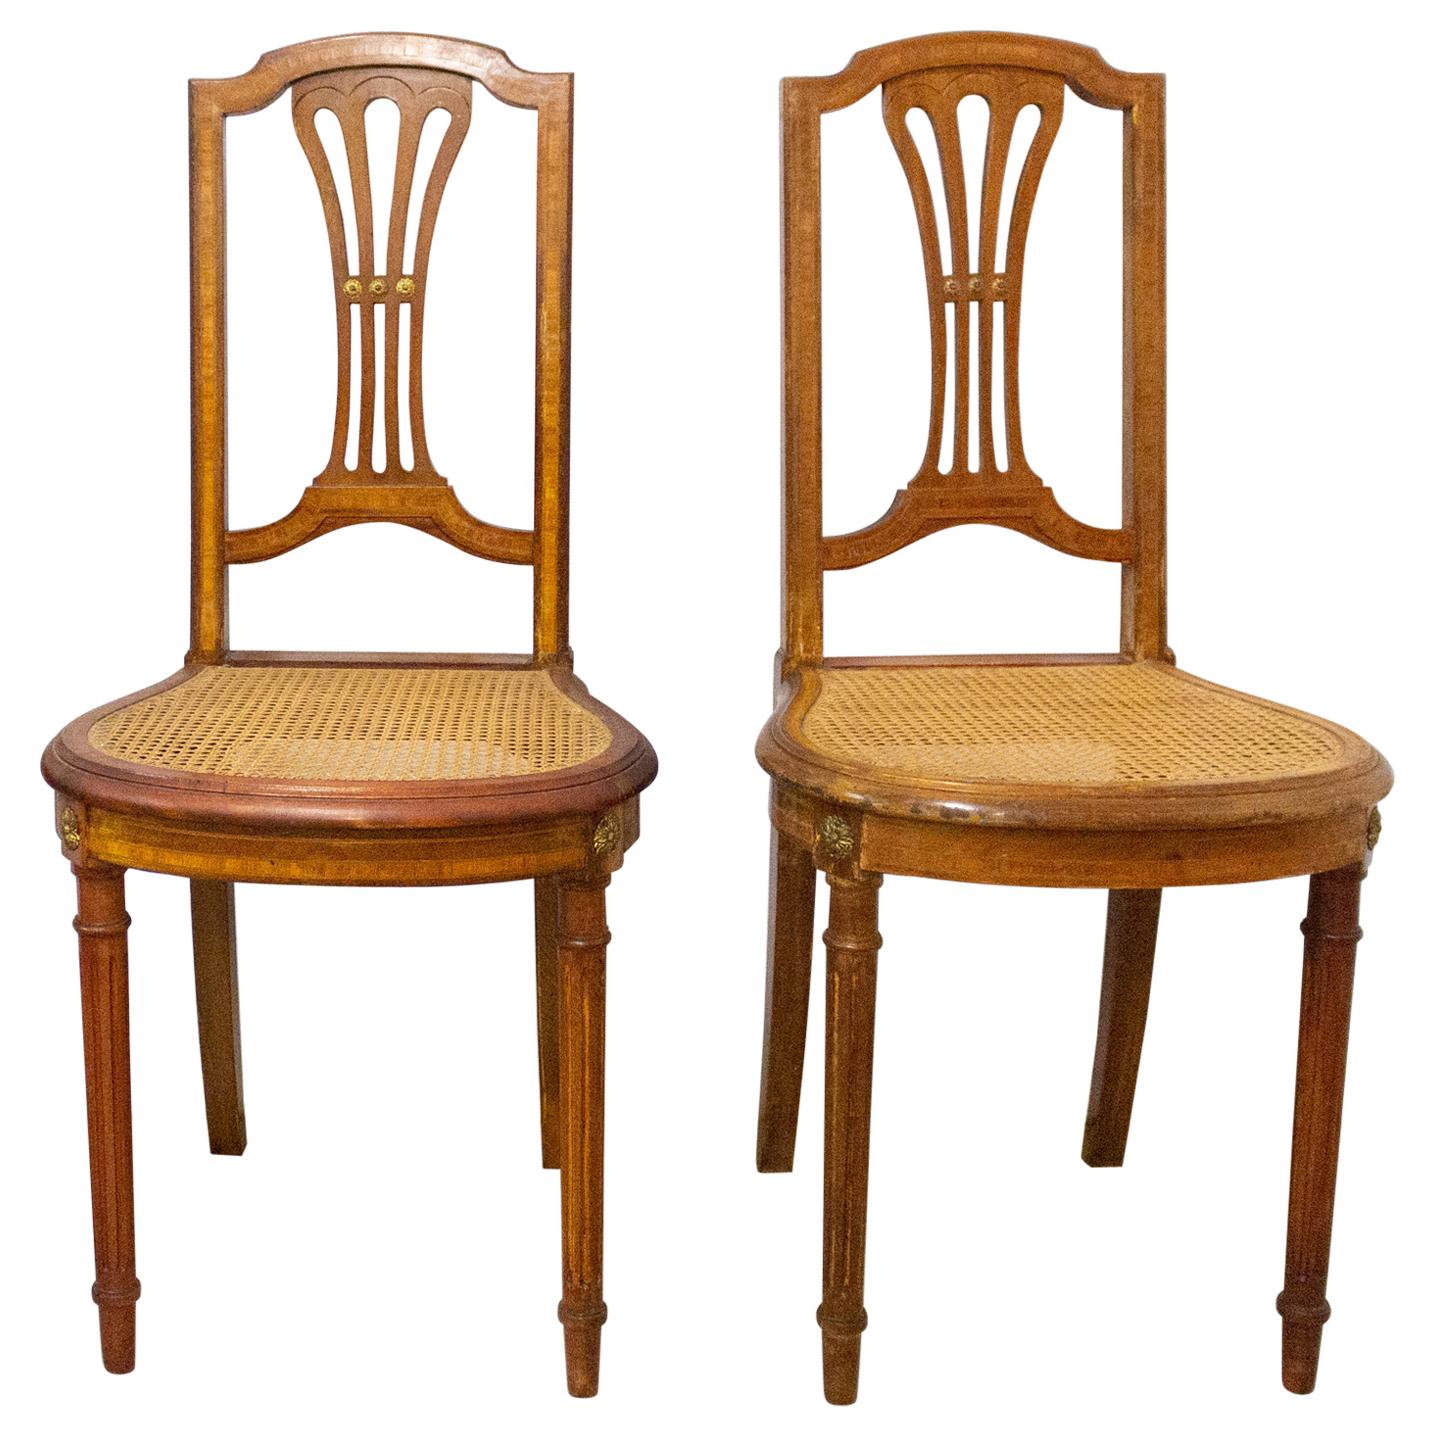 Pair of Caned Dining Chairs or Side Chairs Louis XVI Style French